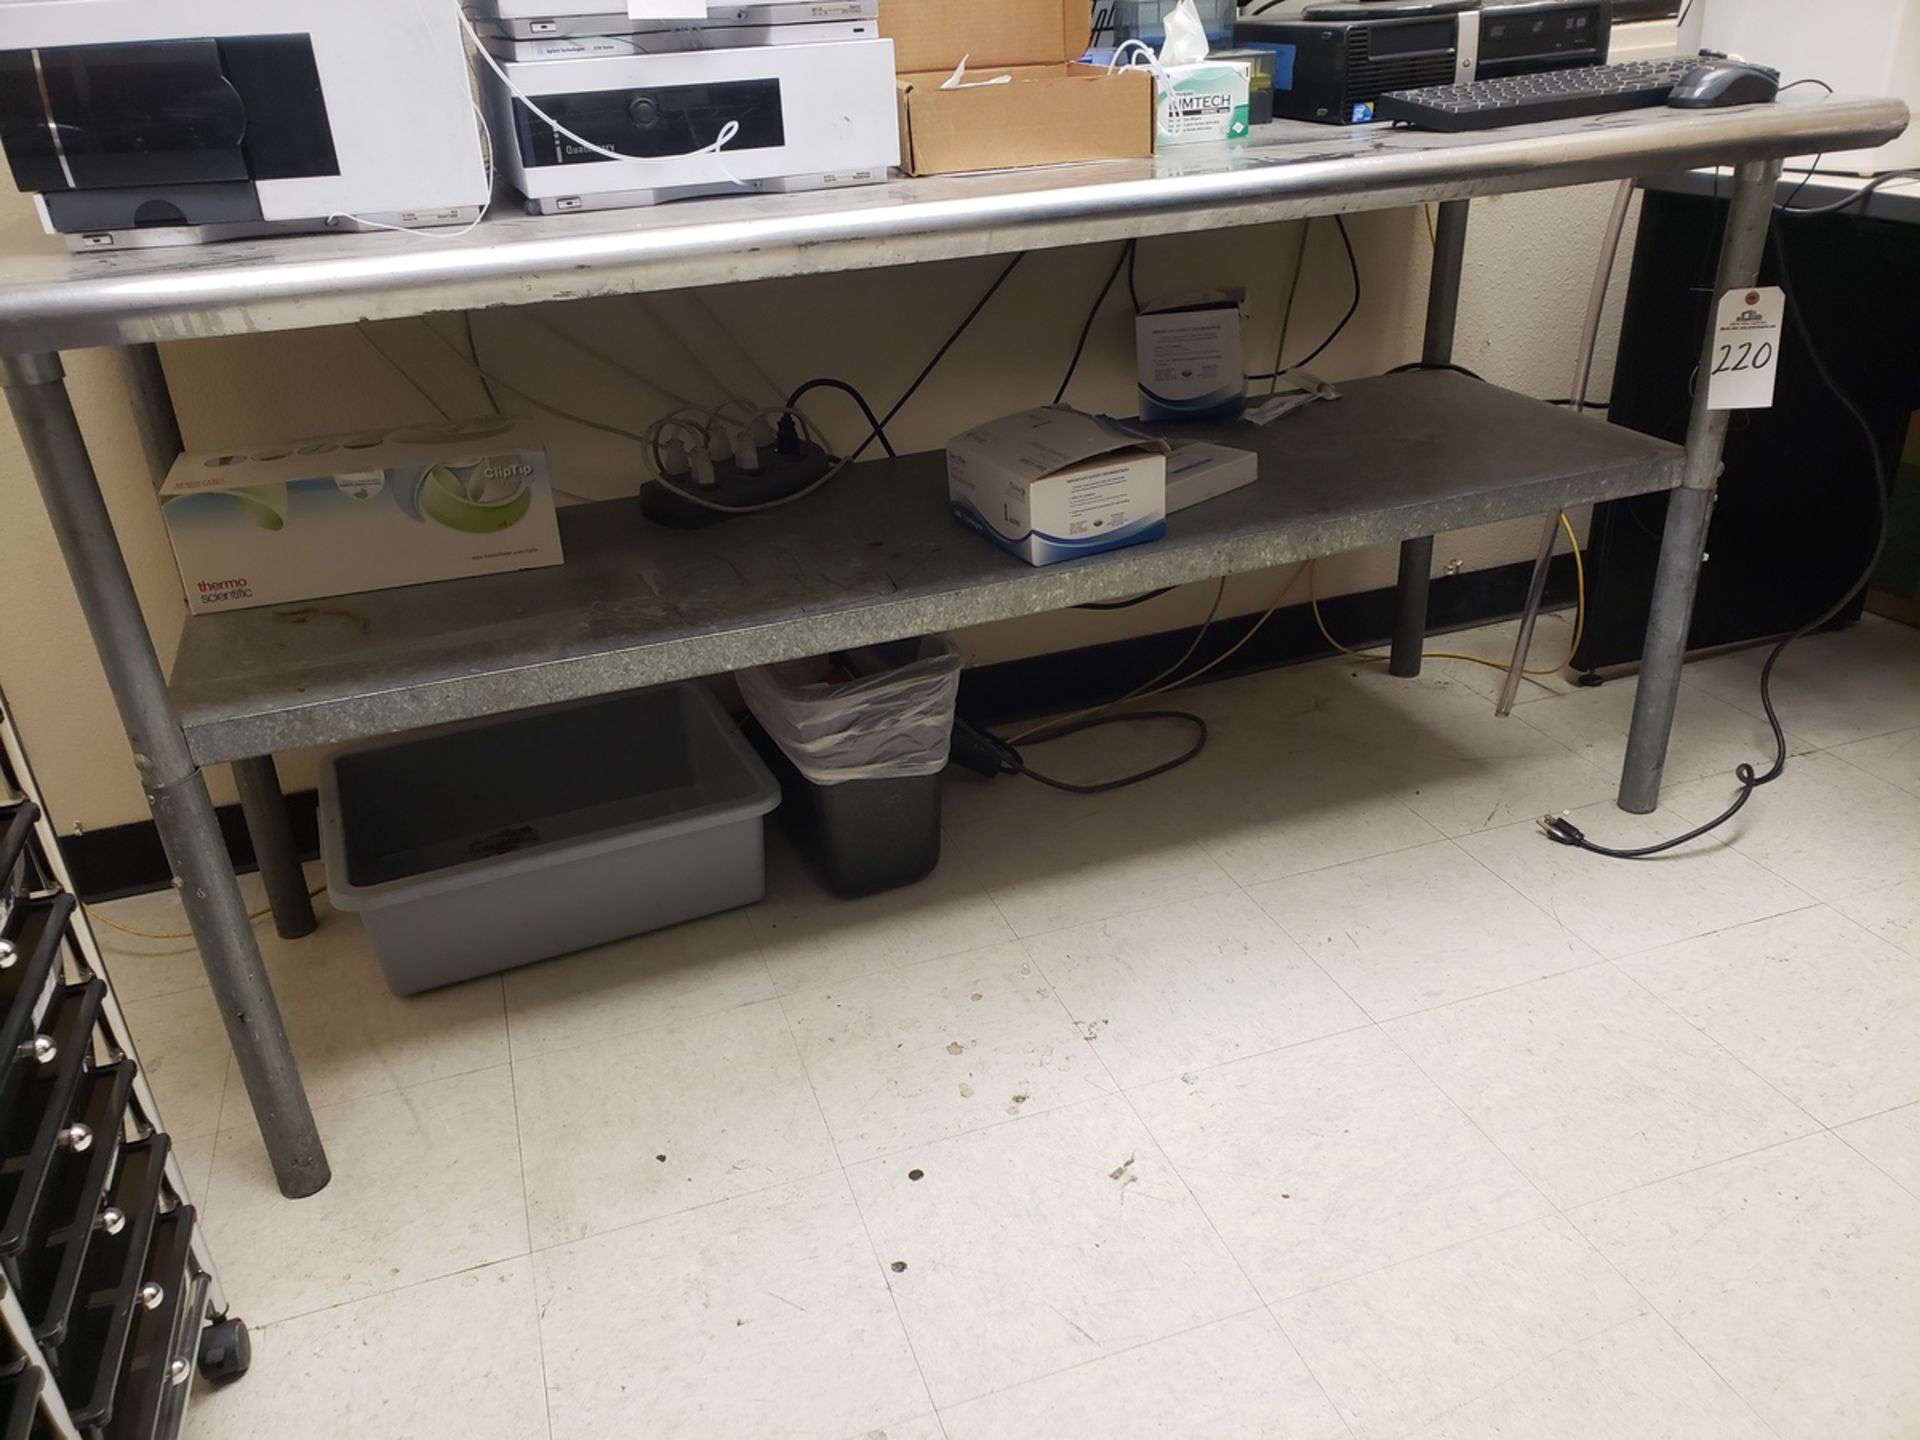 Stainless Steel Table, 30" x 6' | Rig Fee $35